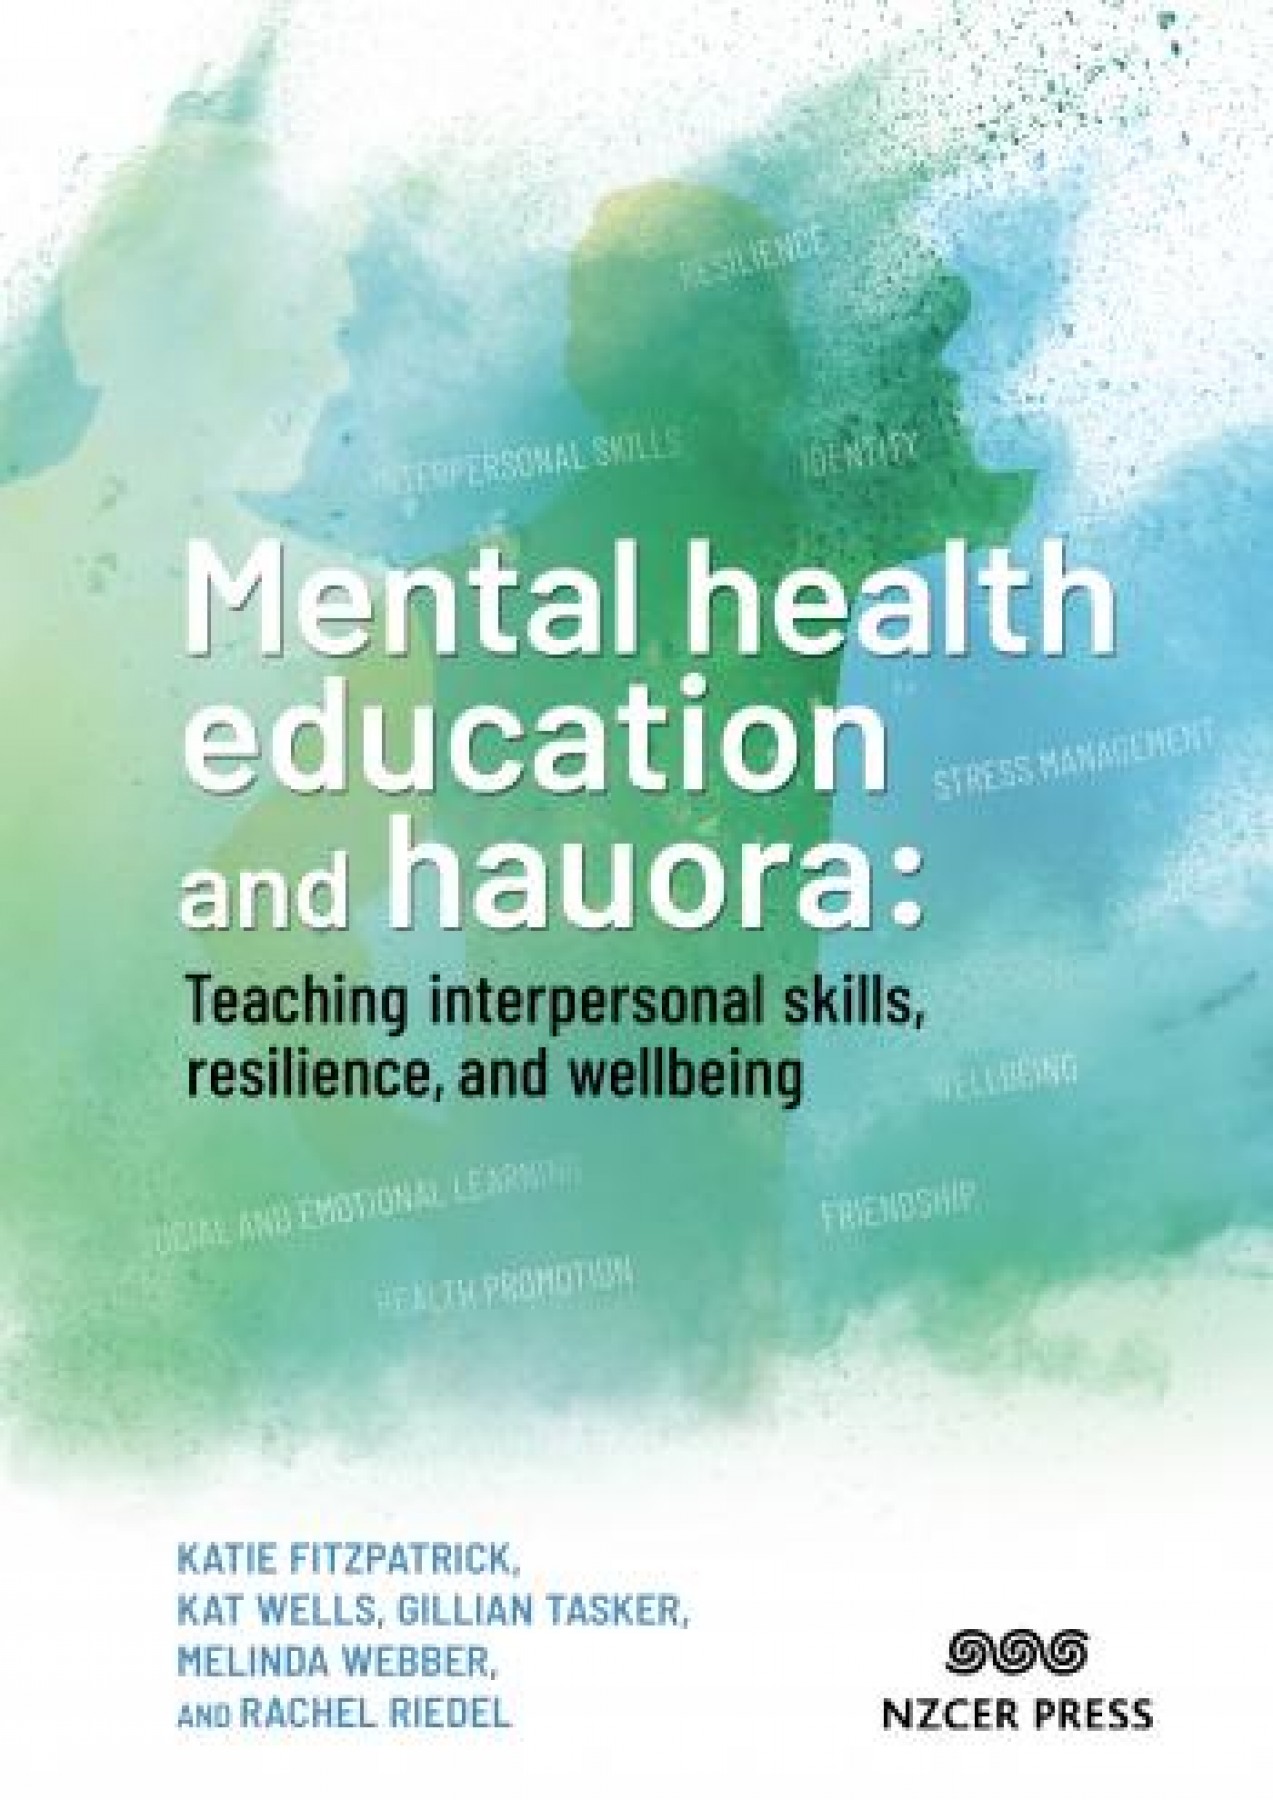 Mental health education and hauora: Teaching interpersonal skills, resilience, and wellbeing